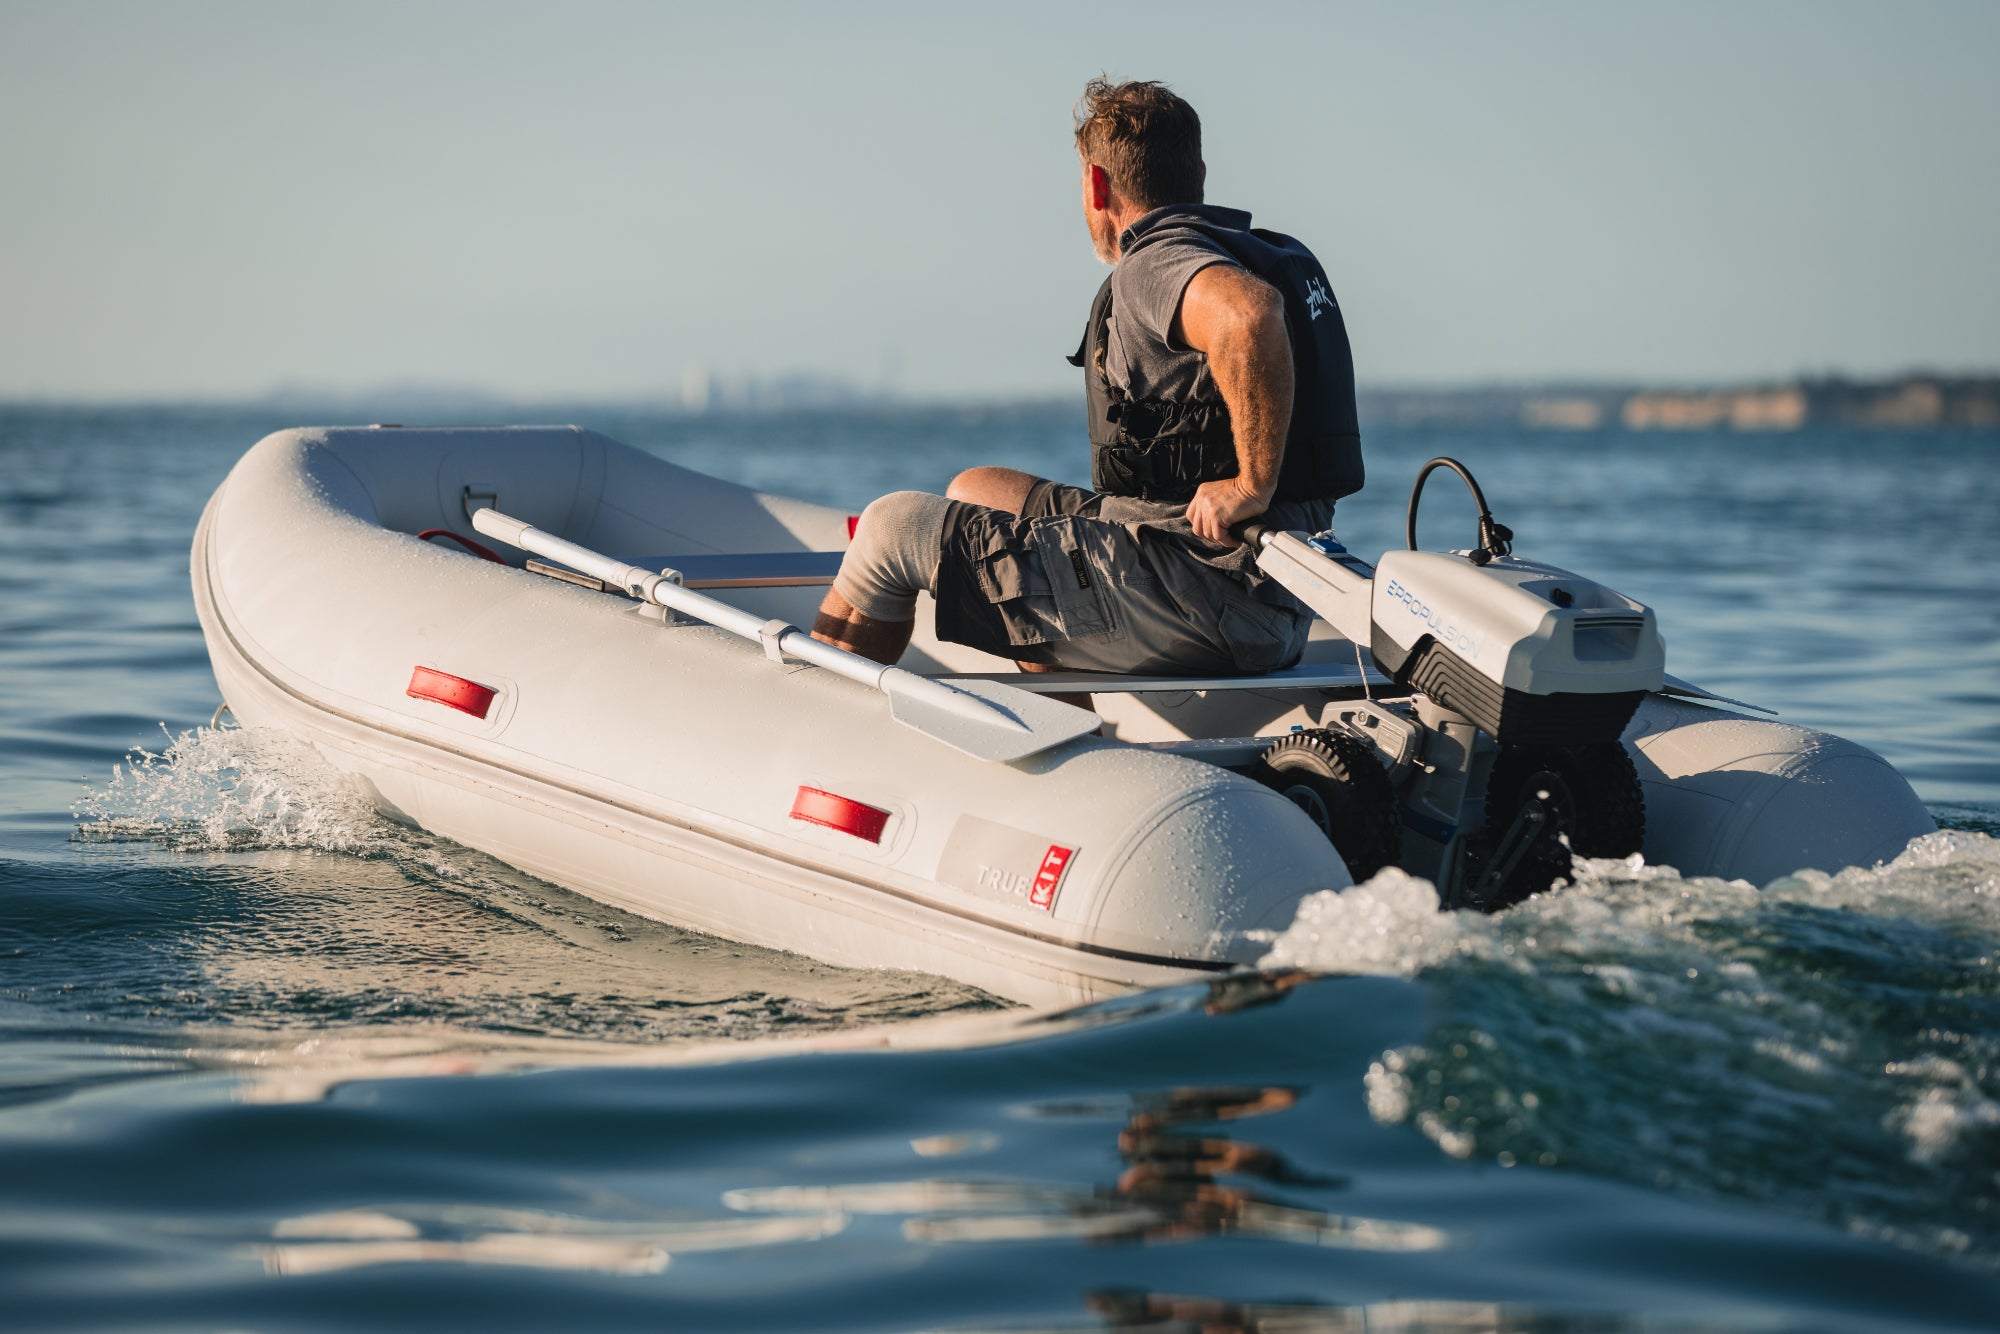 True Kit Navigator with ePropulsion outboard